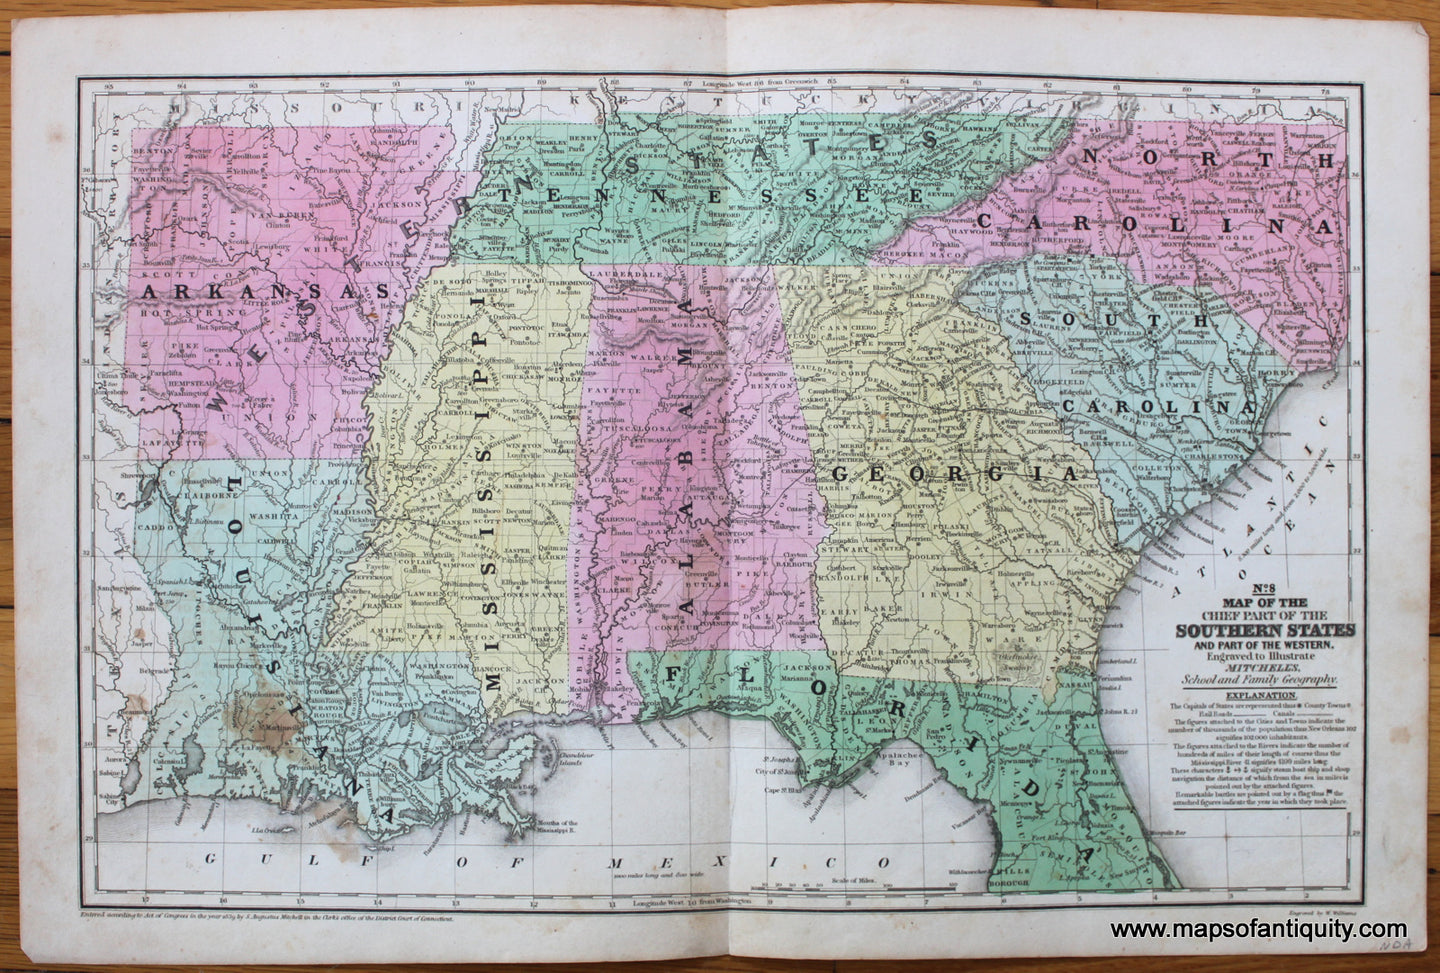 Antique-Hand-Colored-Map-No.-8-Map-of-the-Chief-Part-of-the-Southern-States-and-Part-of-the-Western.-******-United-States-South-1839-Mitchell-Maps-Of-Antiquity